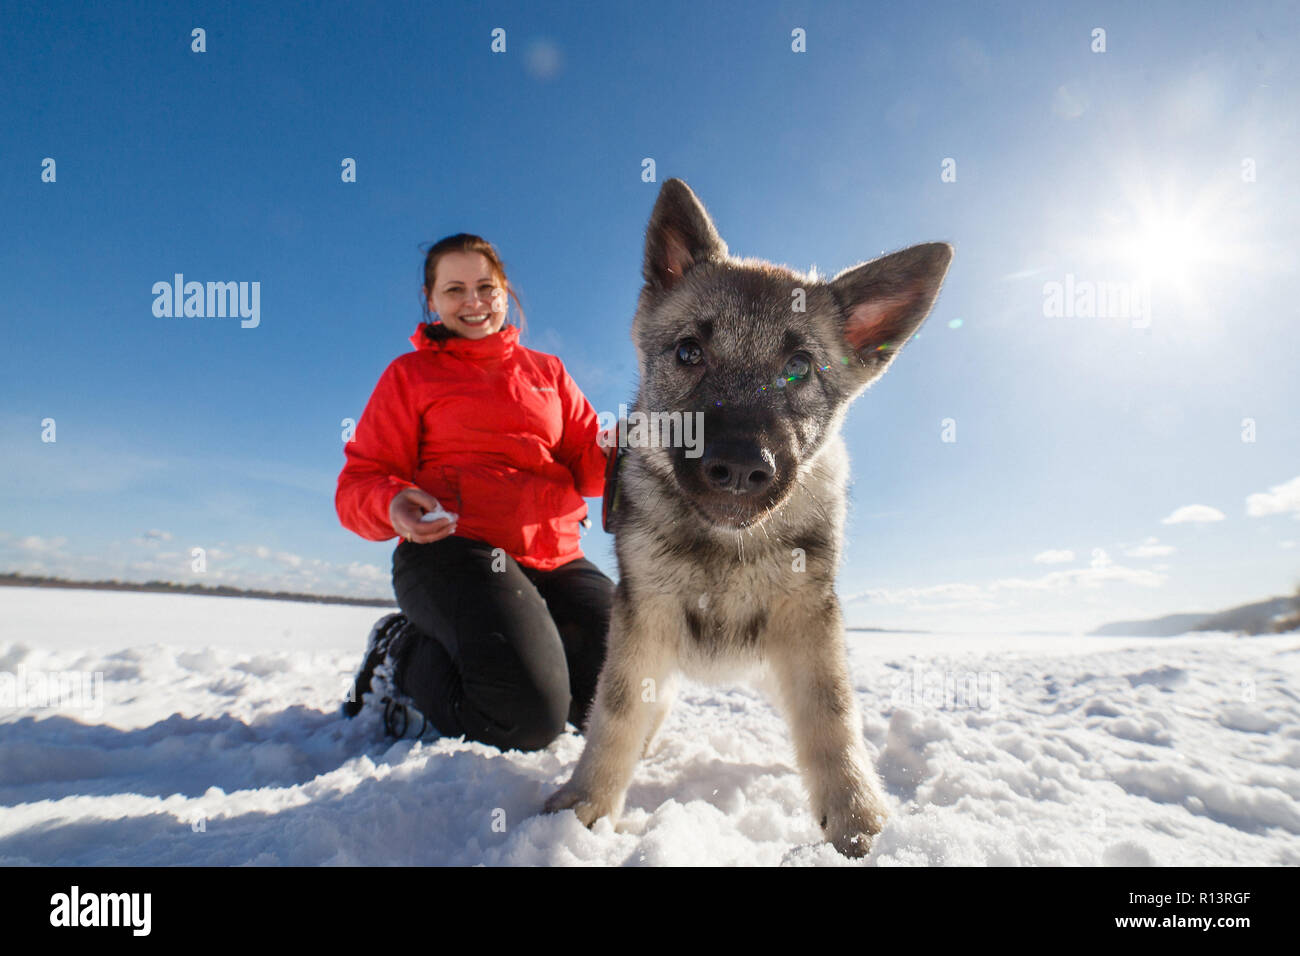 Little puppy Norwegian grey elkhund (norsk elghund grå) playing with owner in winter park Stock Photo